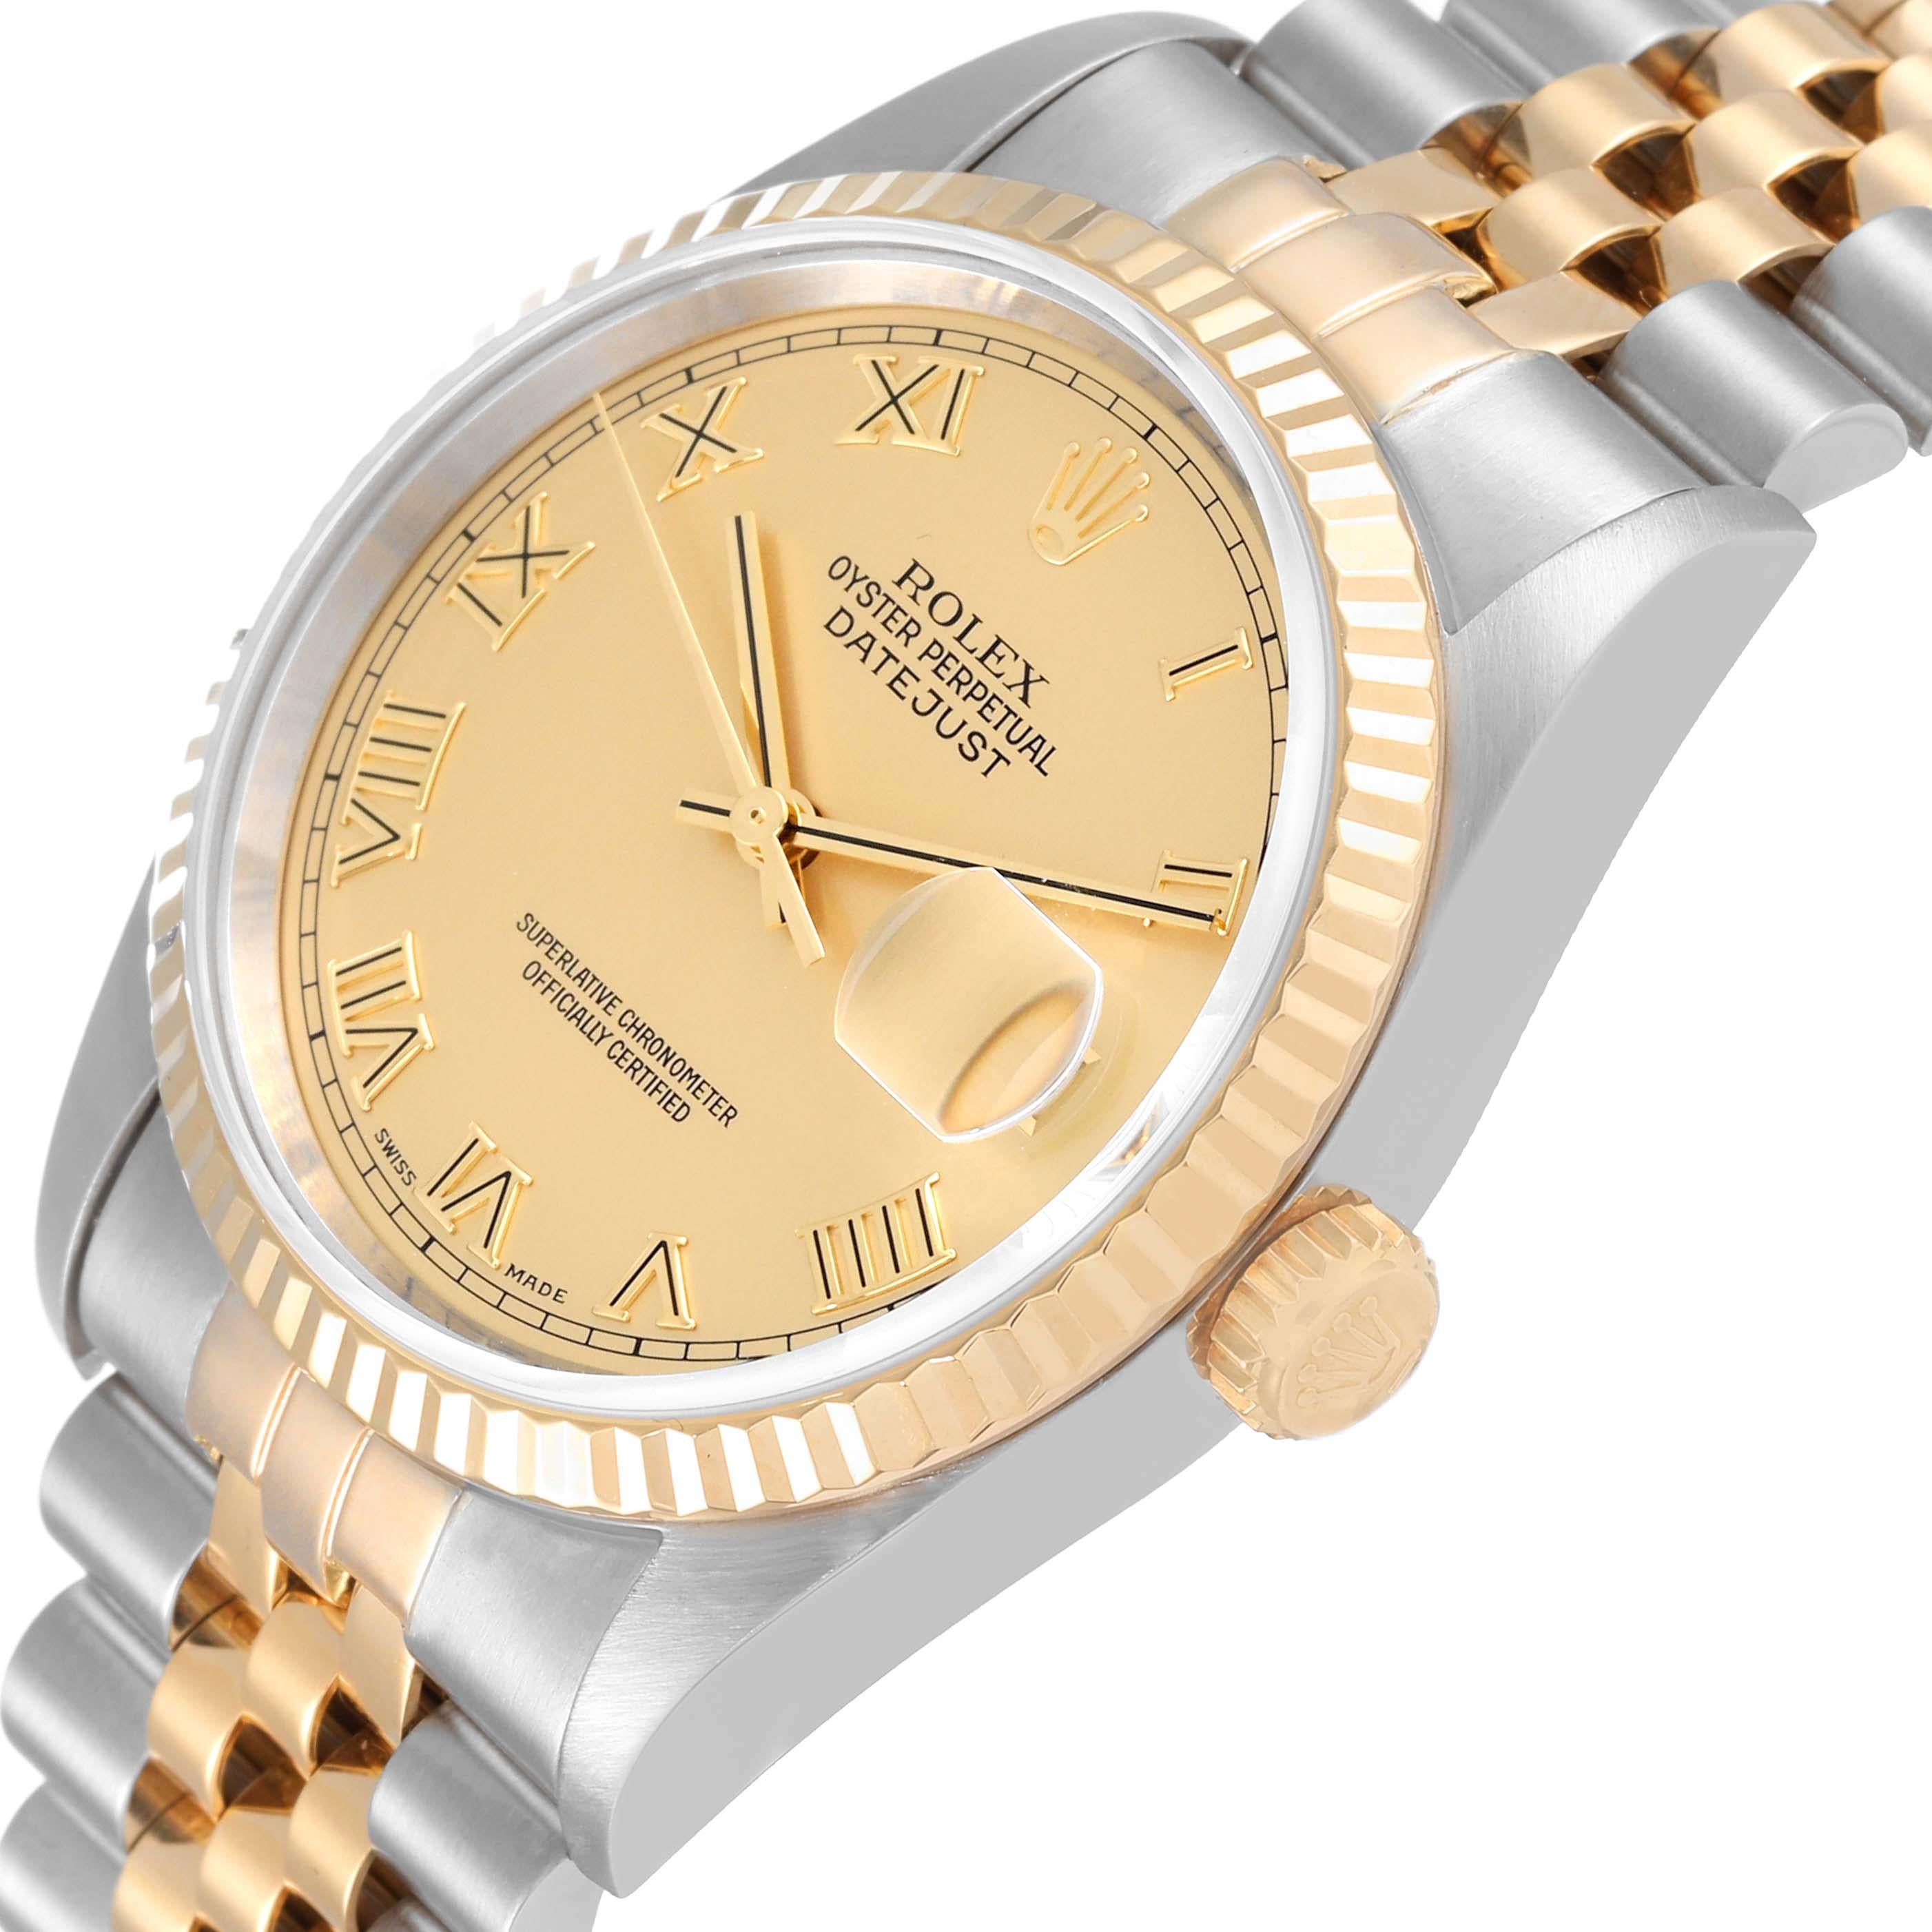 Rolex Datejust Steel Yellow Gold Champagne Dial Mens Watch 16233 For Sale 1